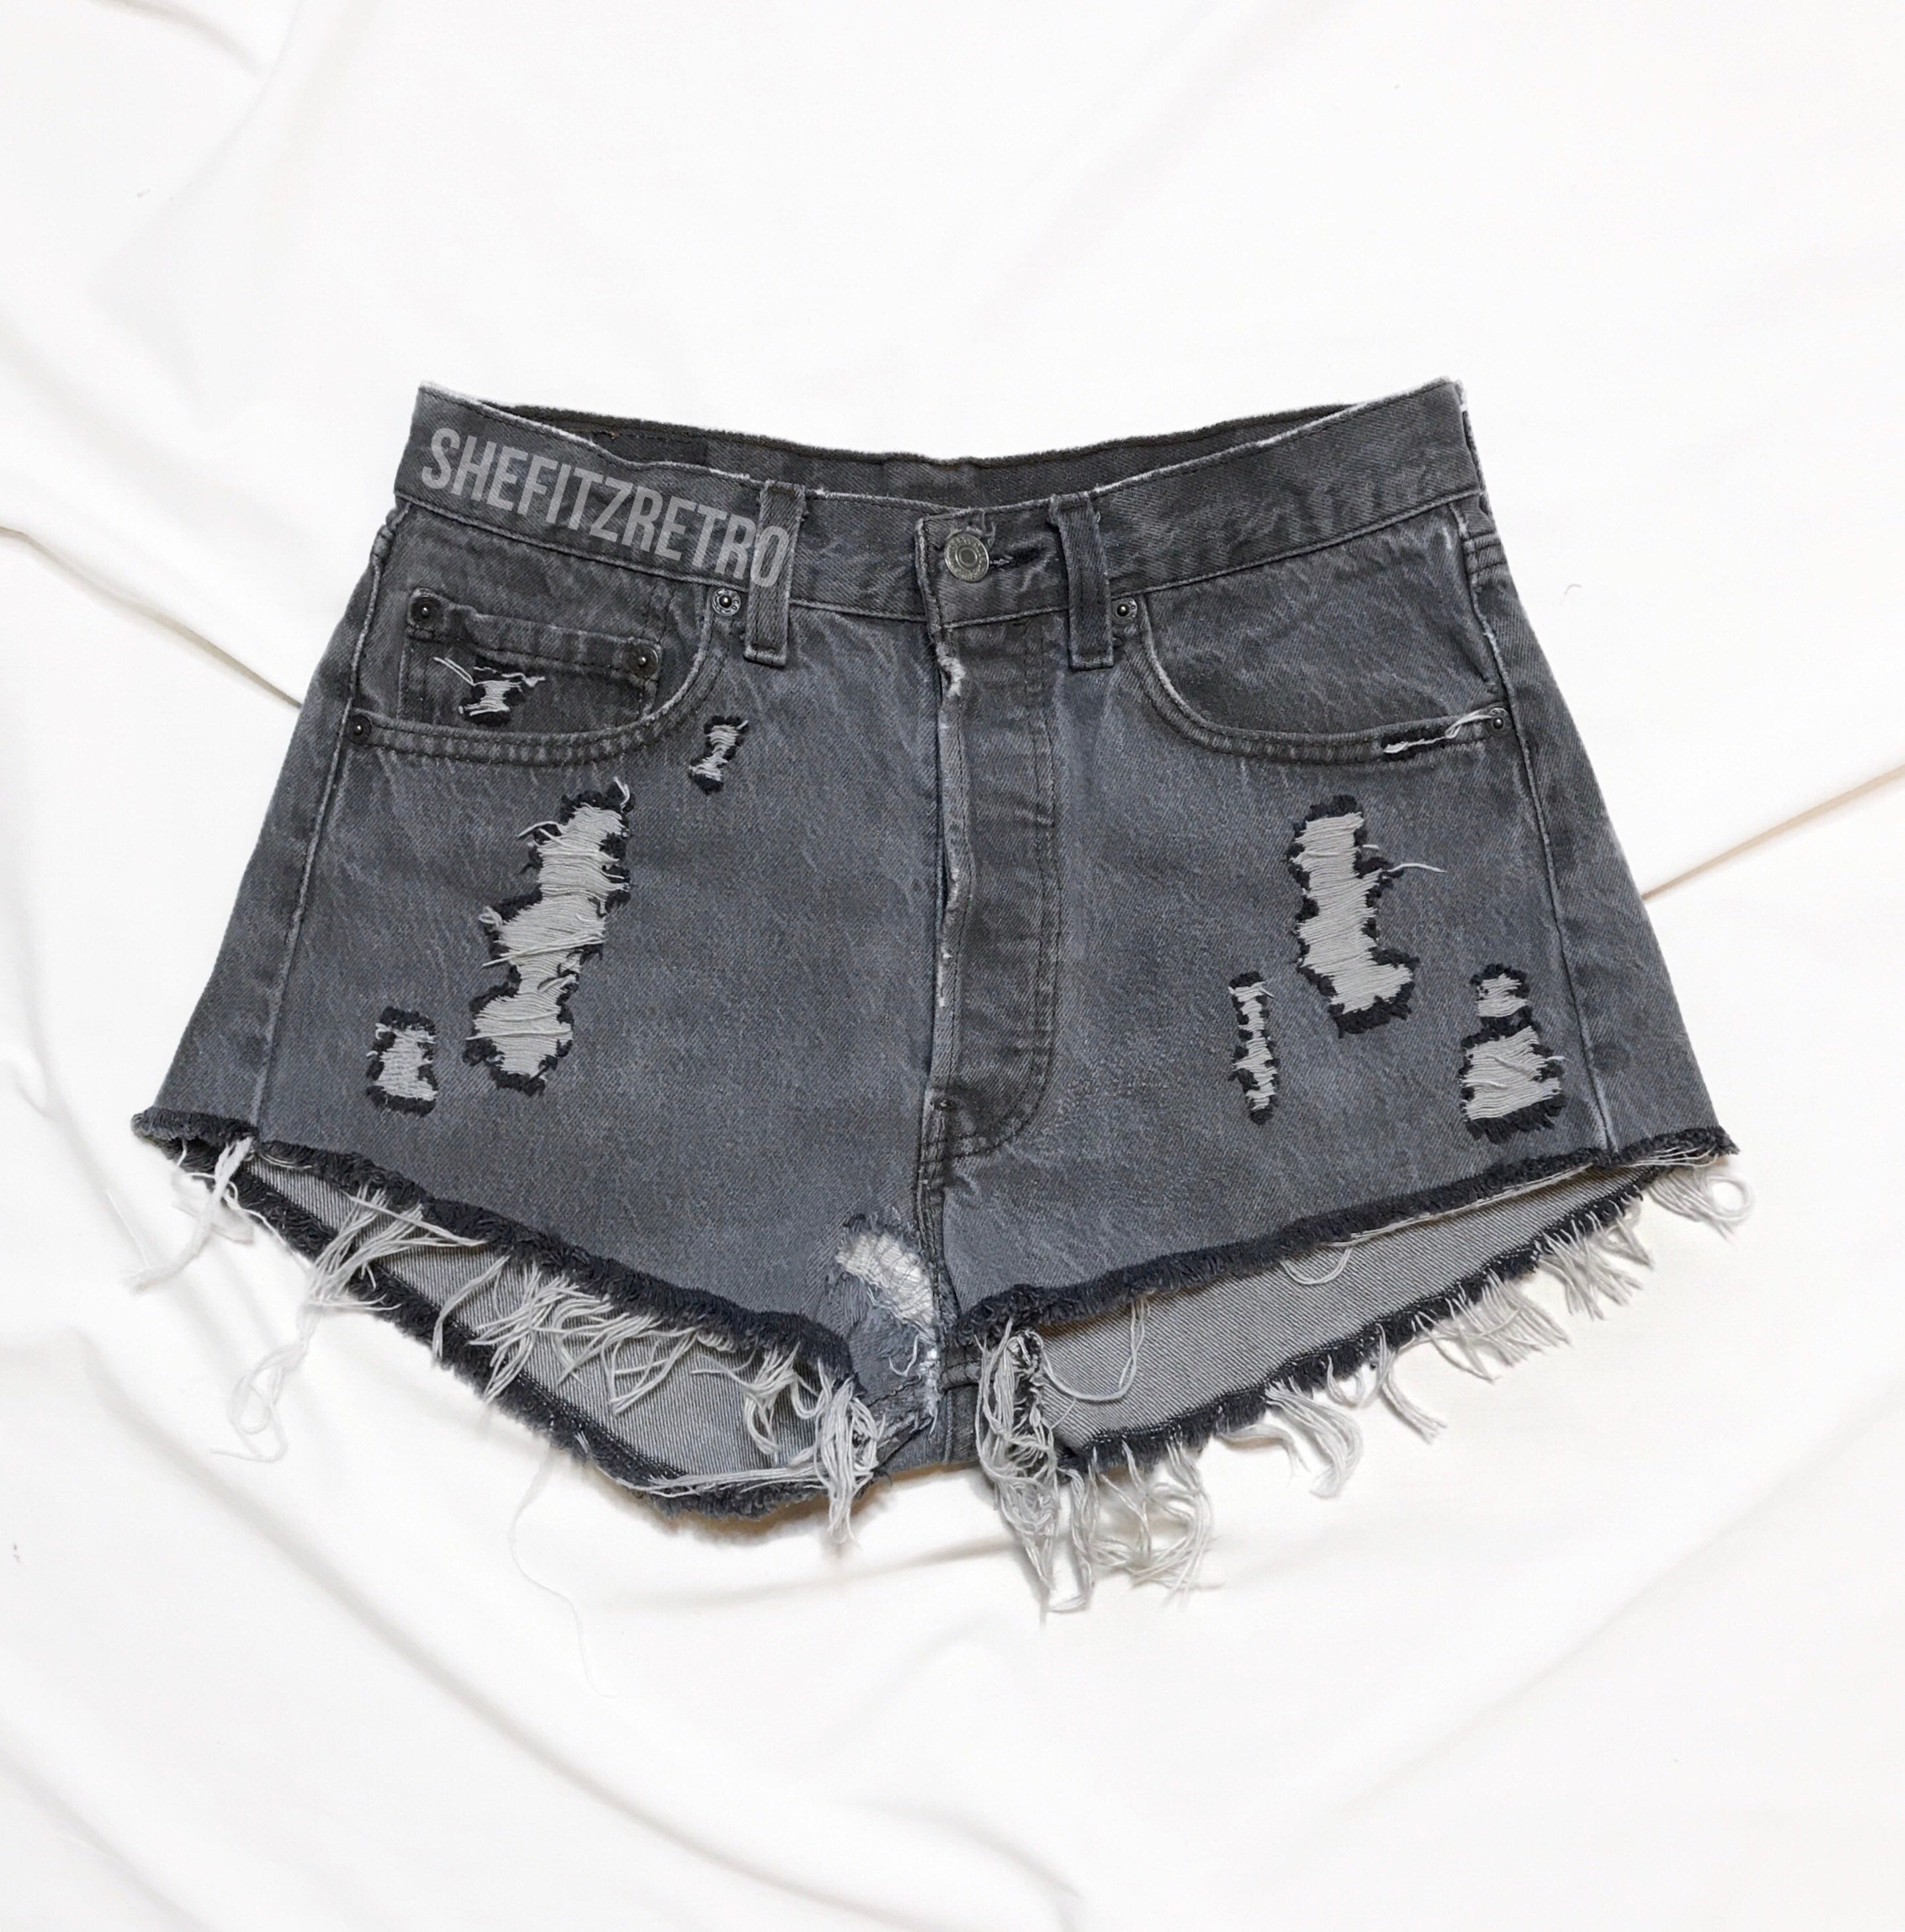 Vintage Faded Grunge 501 Charcoal Ash Gray High Waisted Distressed Levi Shorts Waist Measures 28 Hips 39